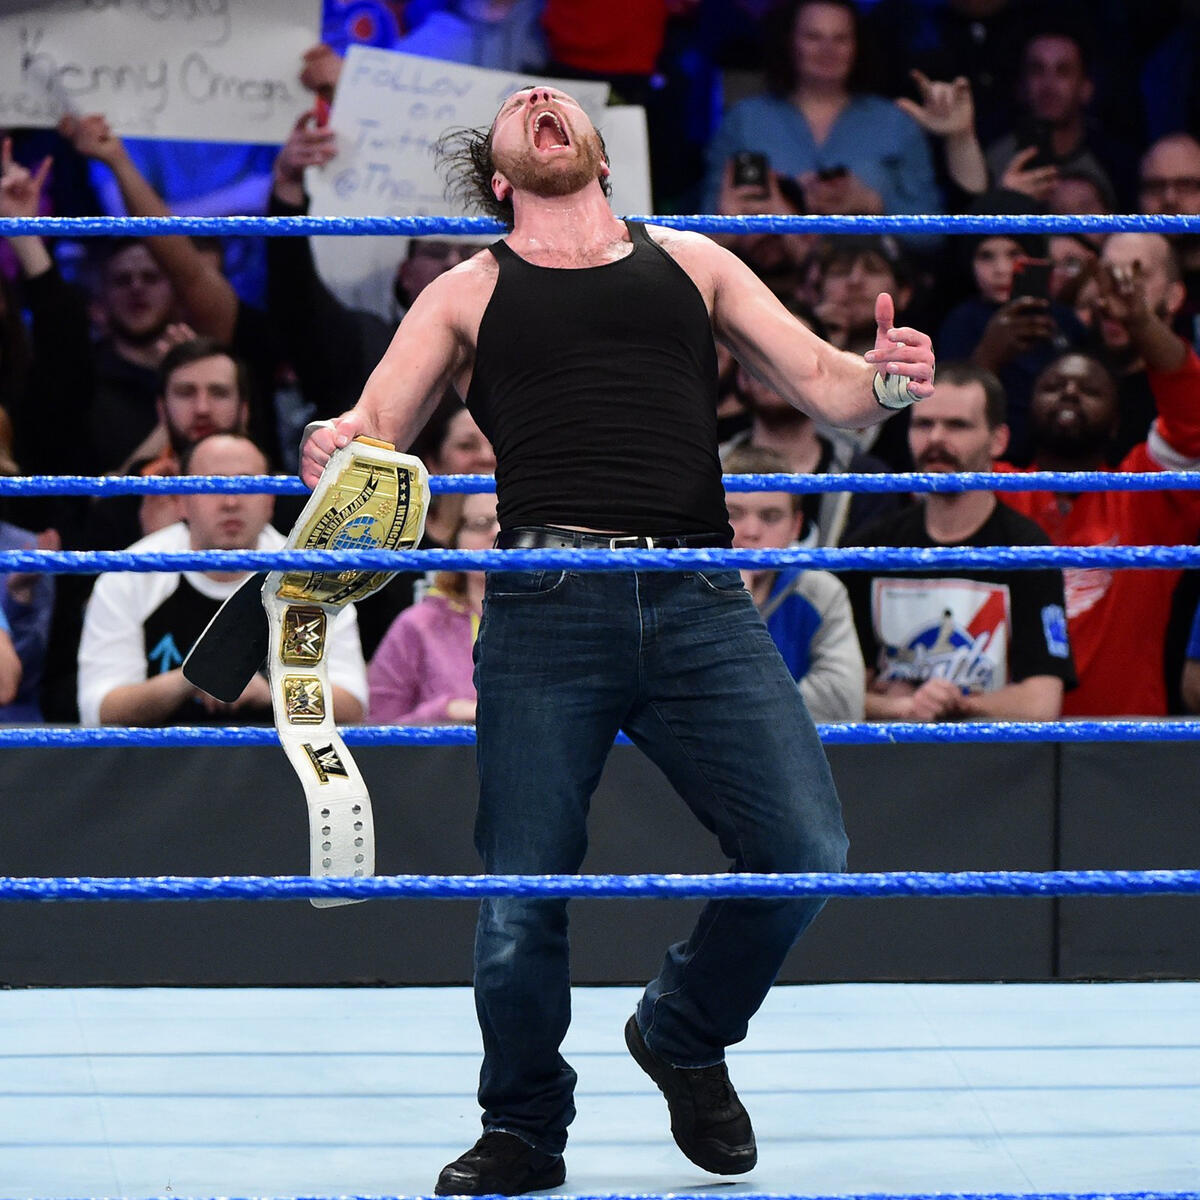 Ambrose retains the Intercontinental Title on the final SmackDown LIVE before Royal Rumble.